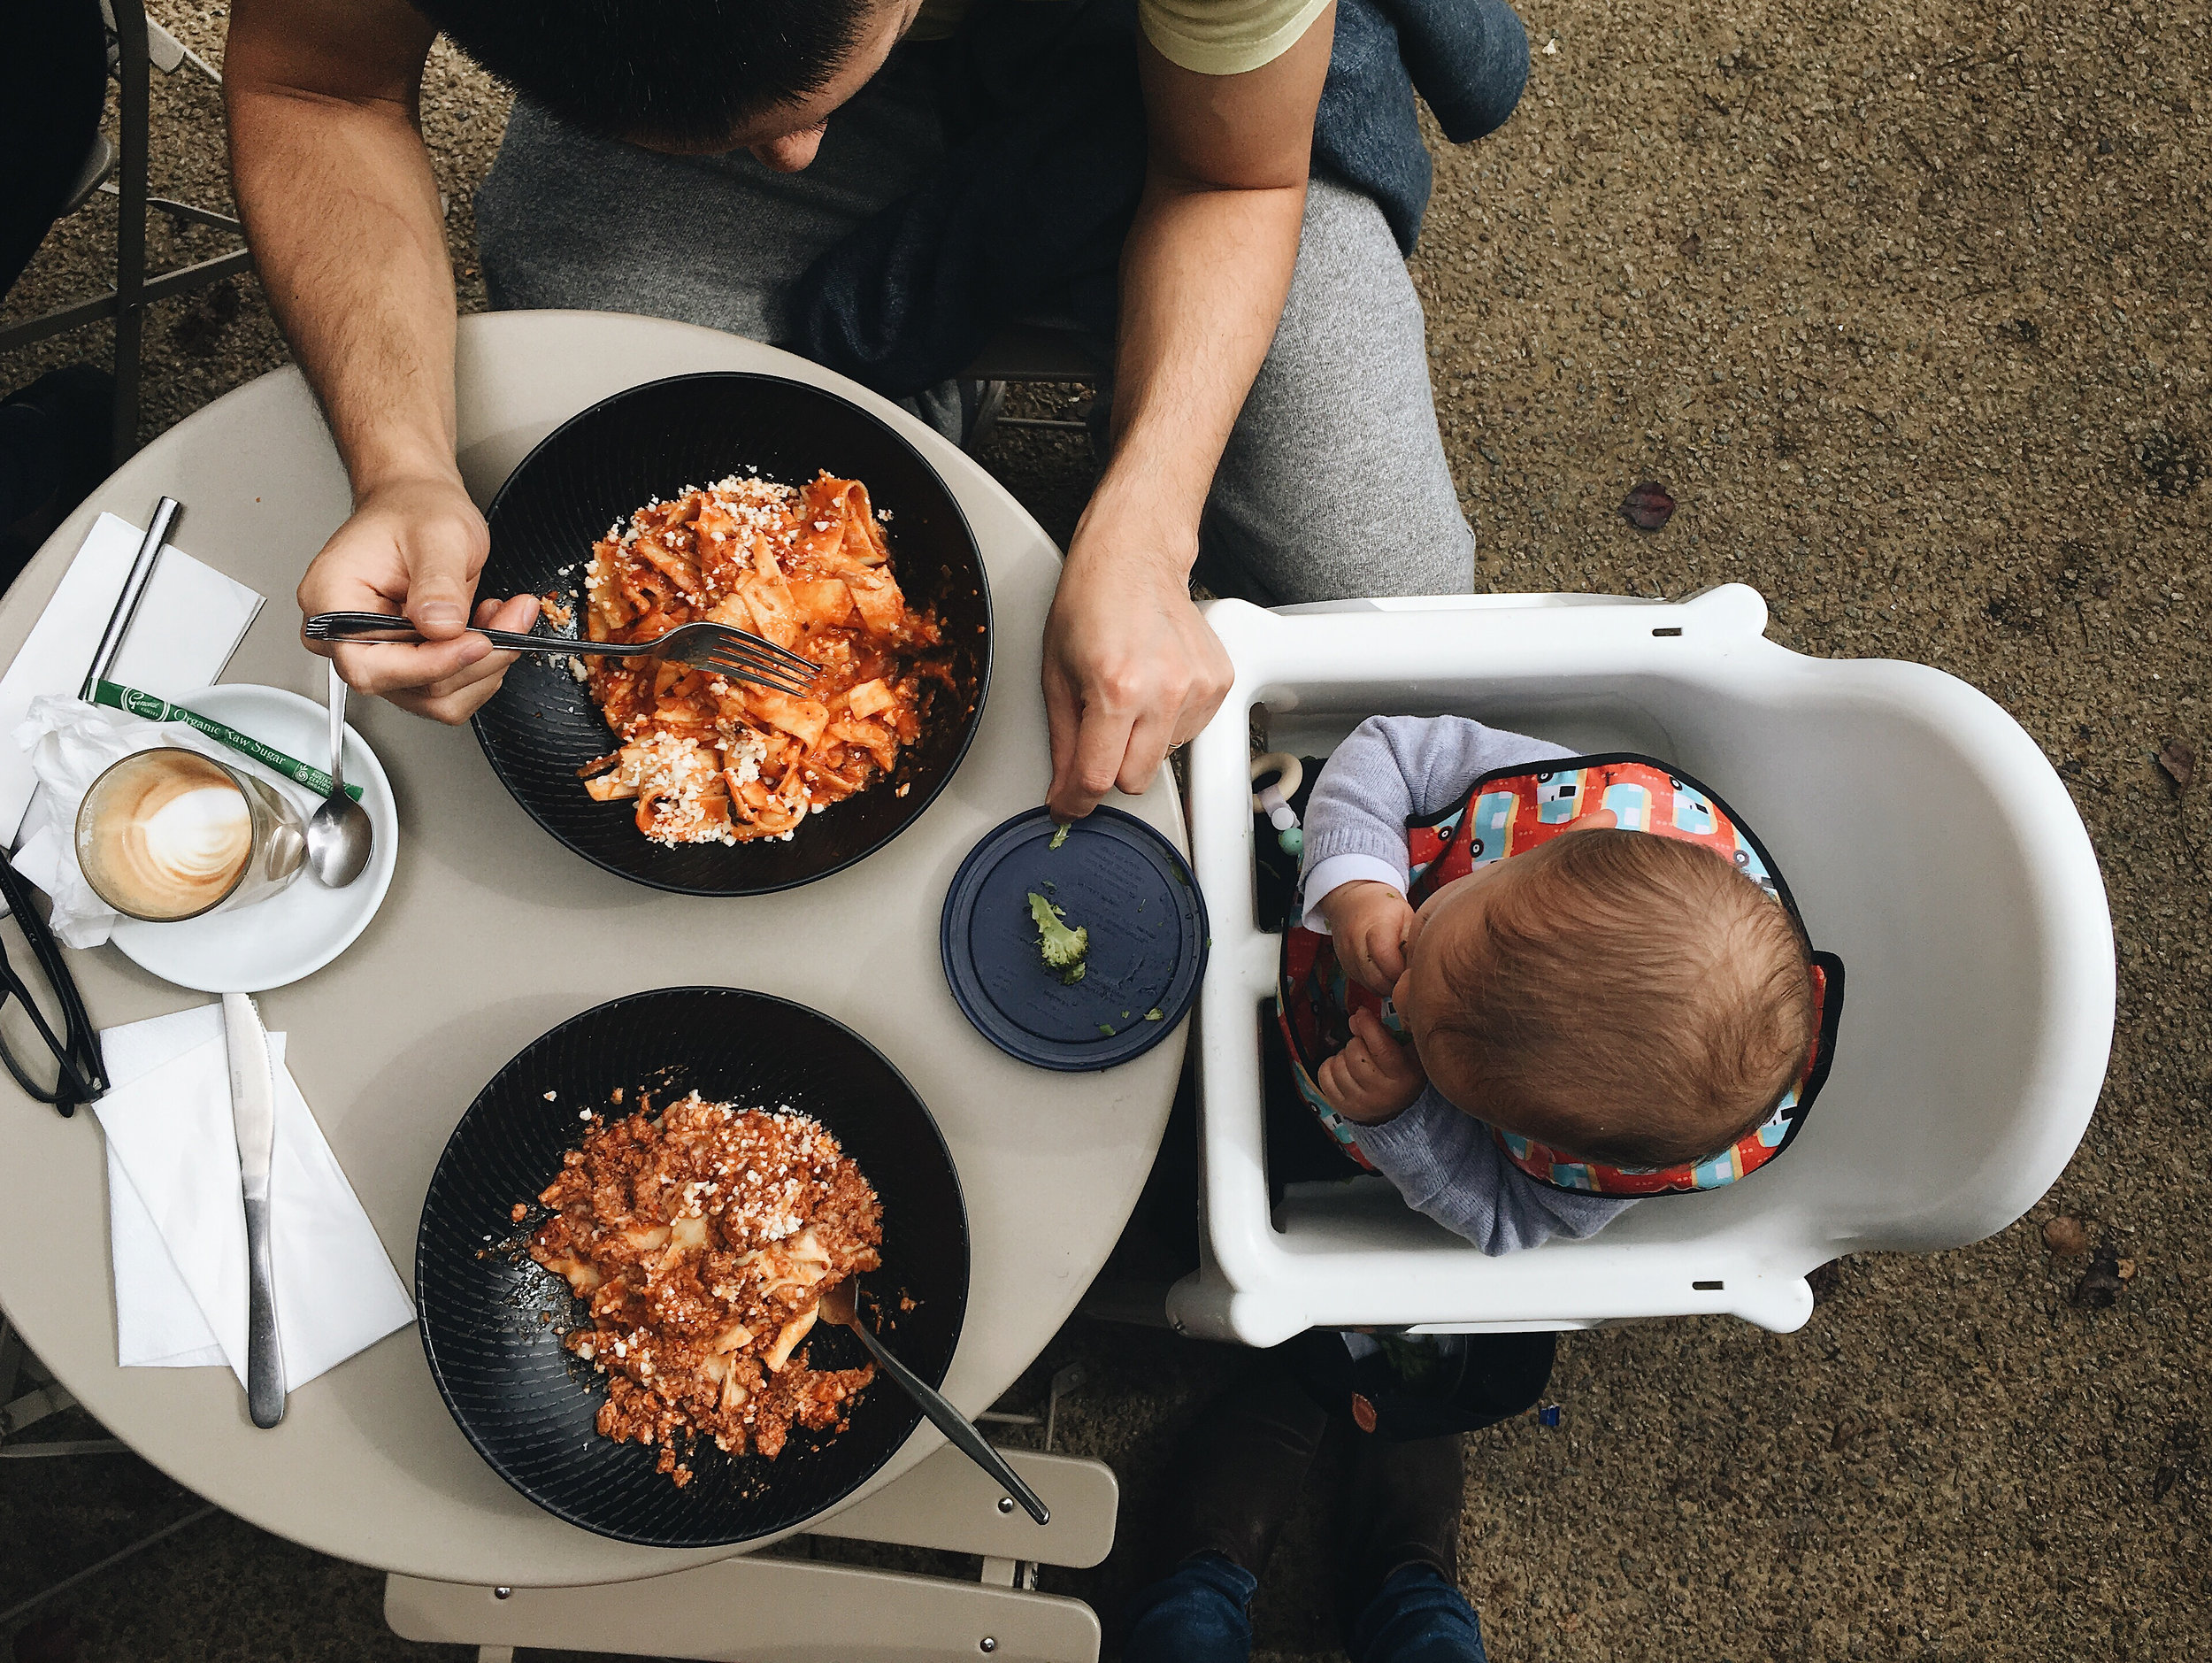 Surprising Research May Make You Reconsider How You Start Your Baby On Solids